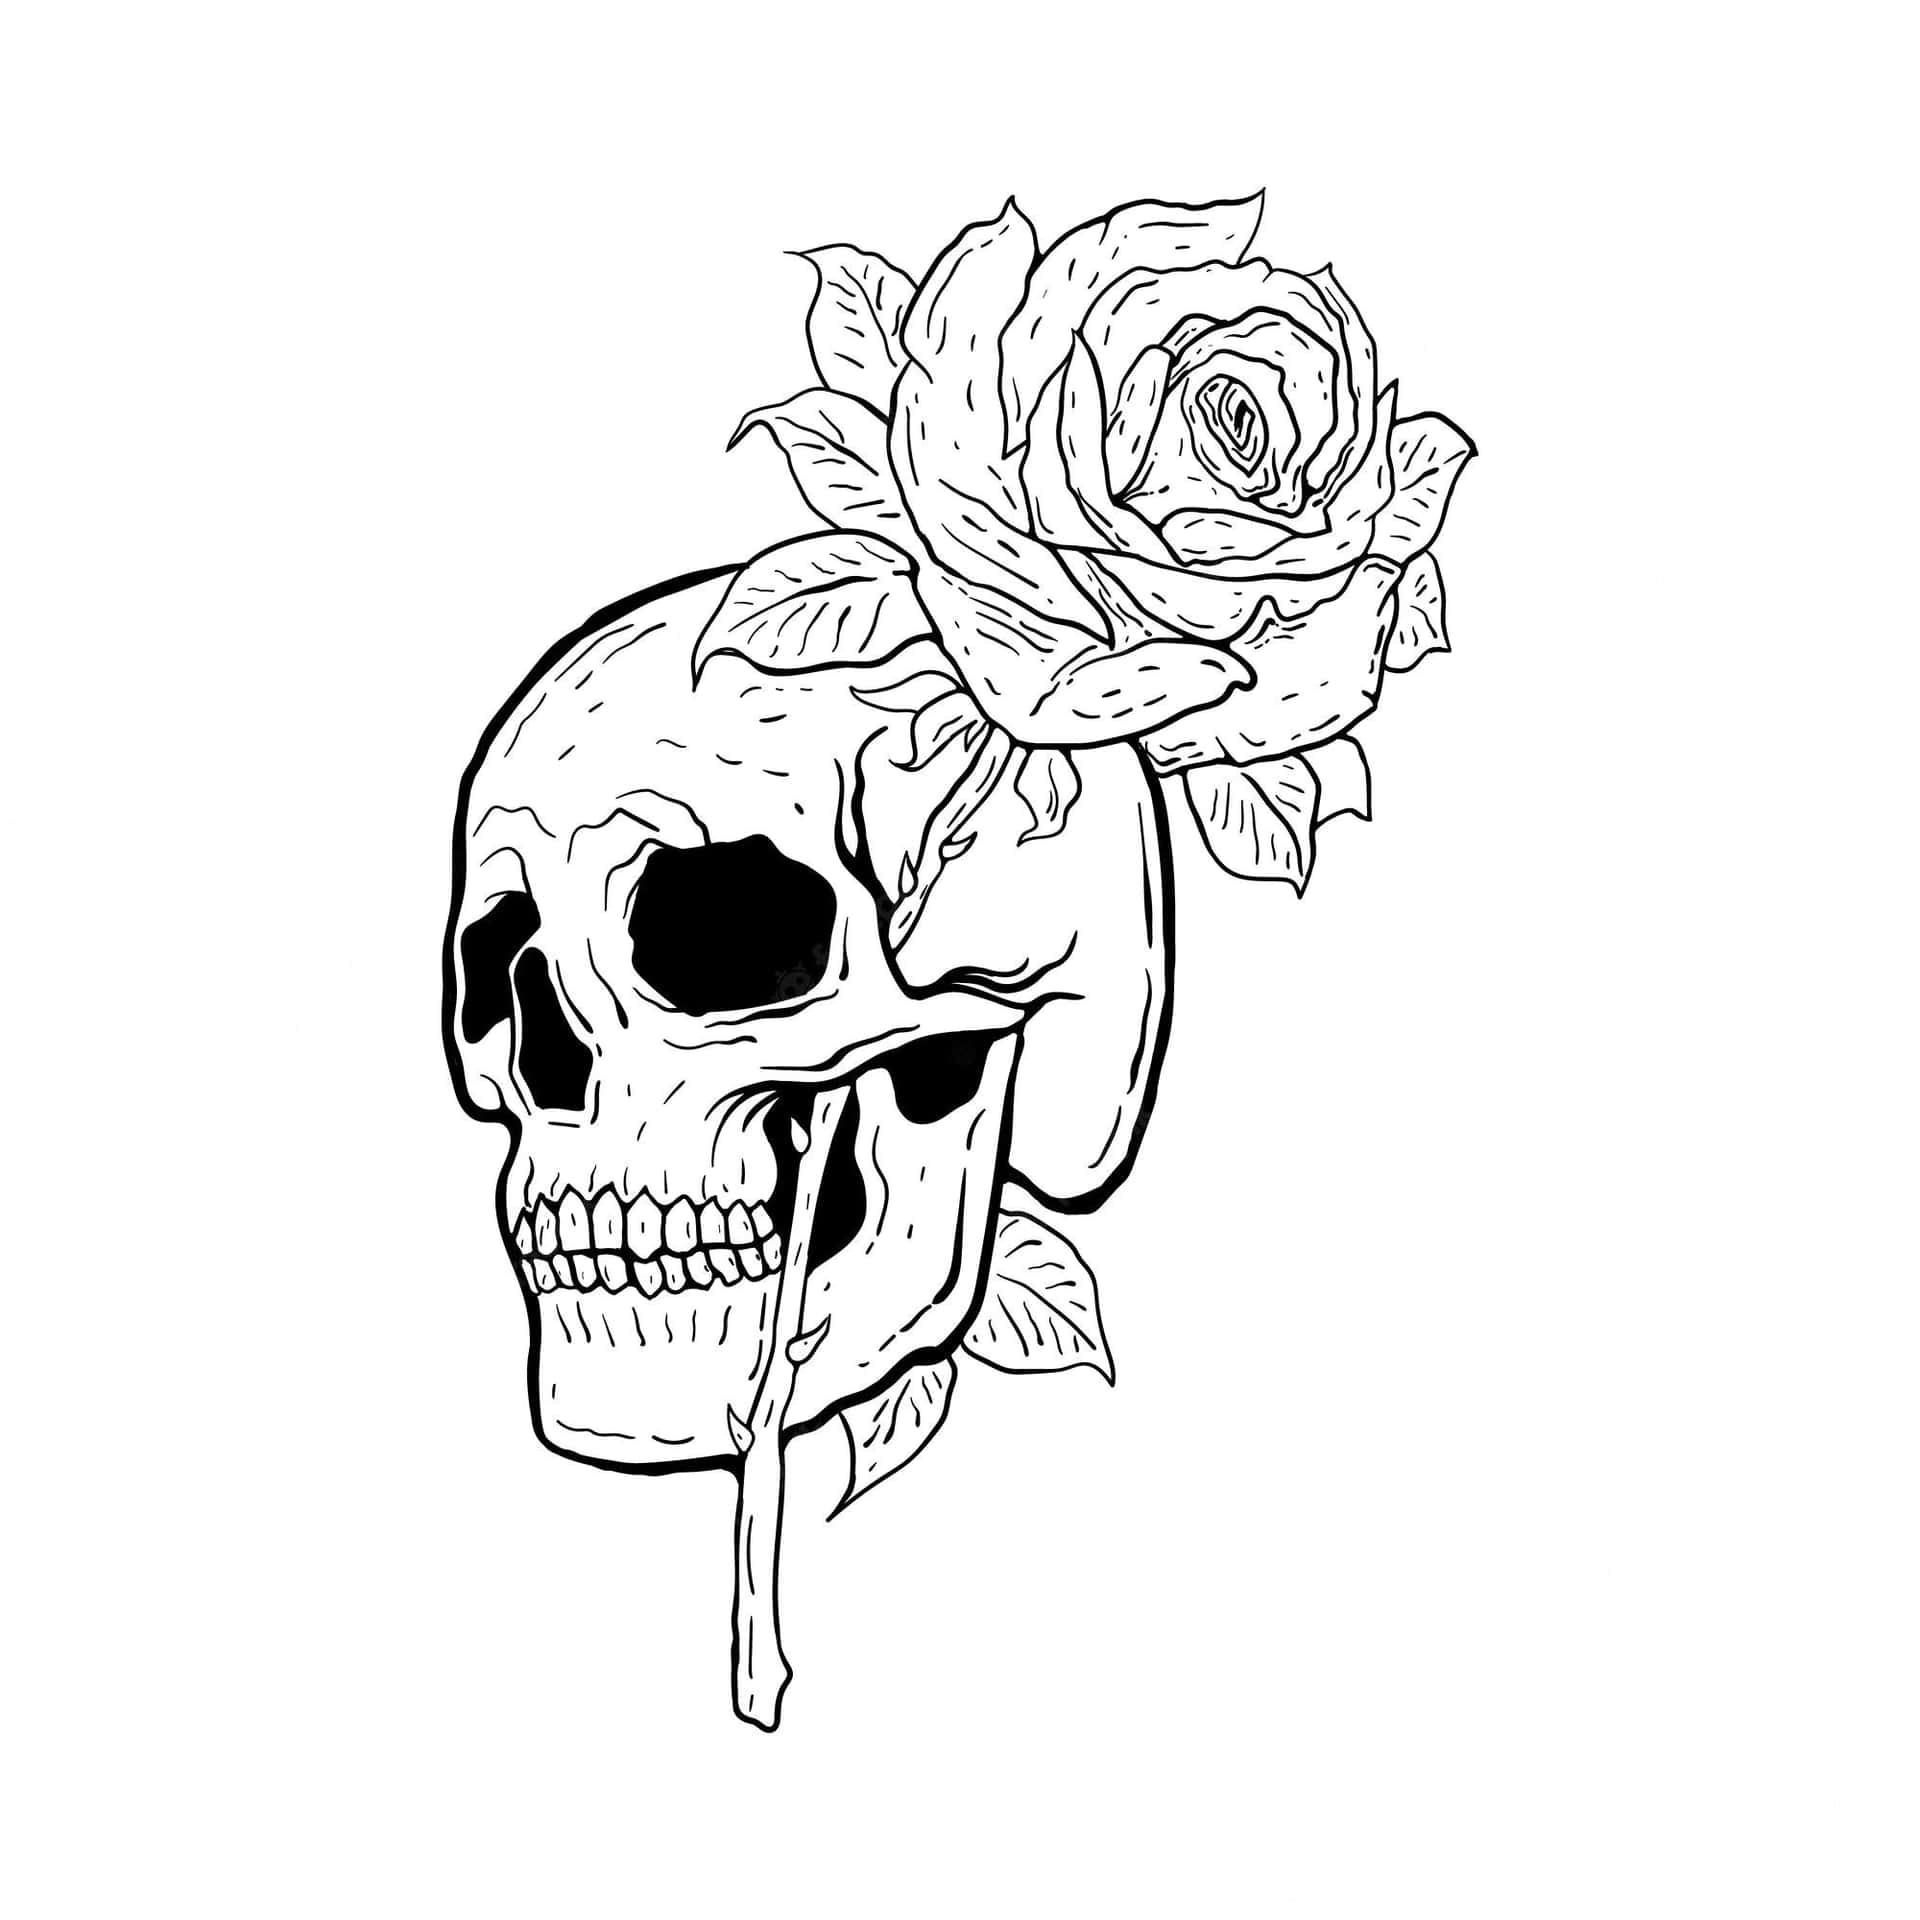 A unique blend of love and death - skulls and roses together in perfect synergy Wallpaper